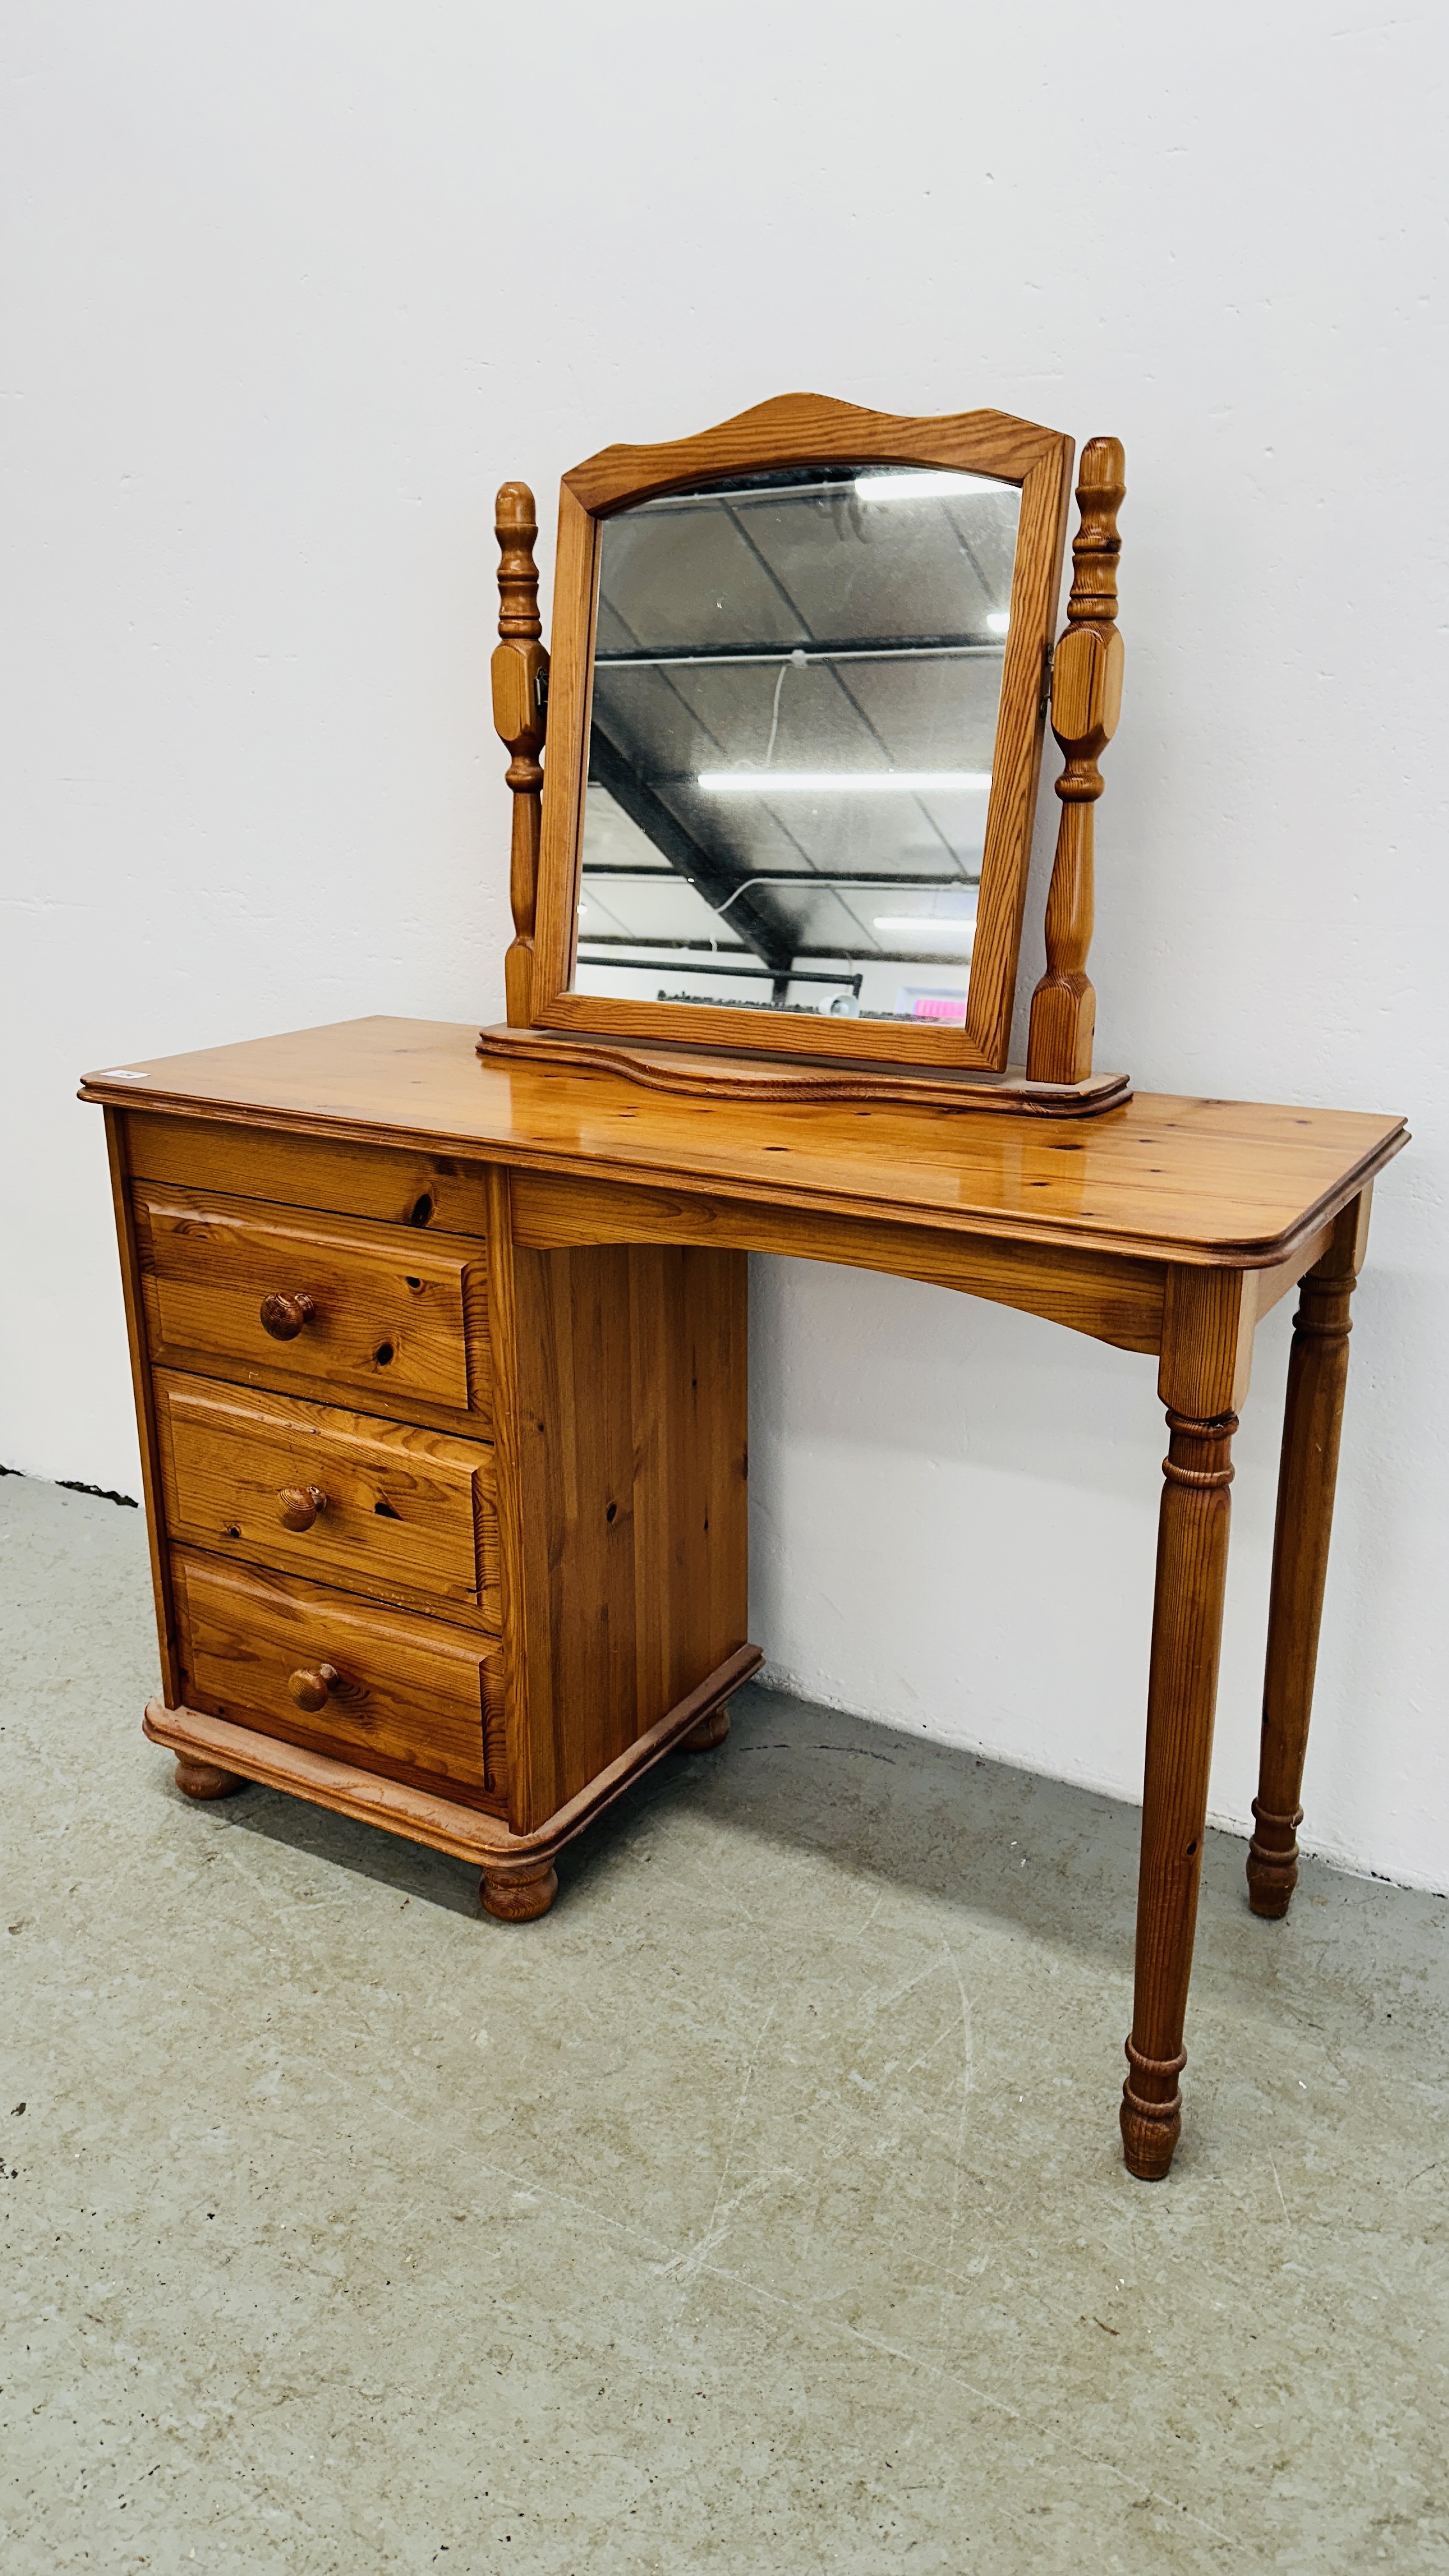 A GOOD QUALITY HONEY PINE 3 DRAWER DRESSING TABLE W 100CM X D 39CM X H 69CM COMPLETE WITH VANITY - Image 6 of 6